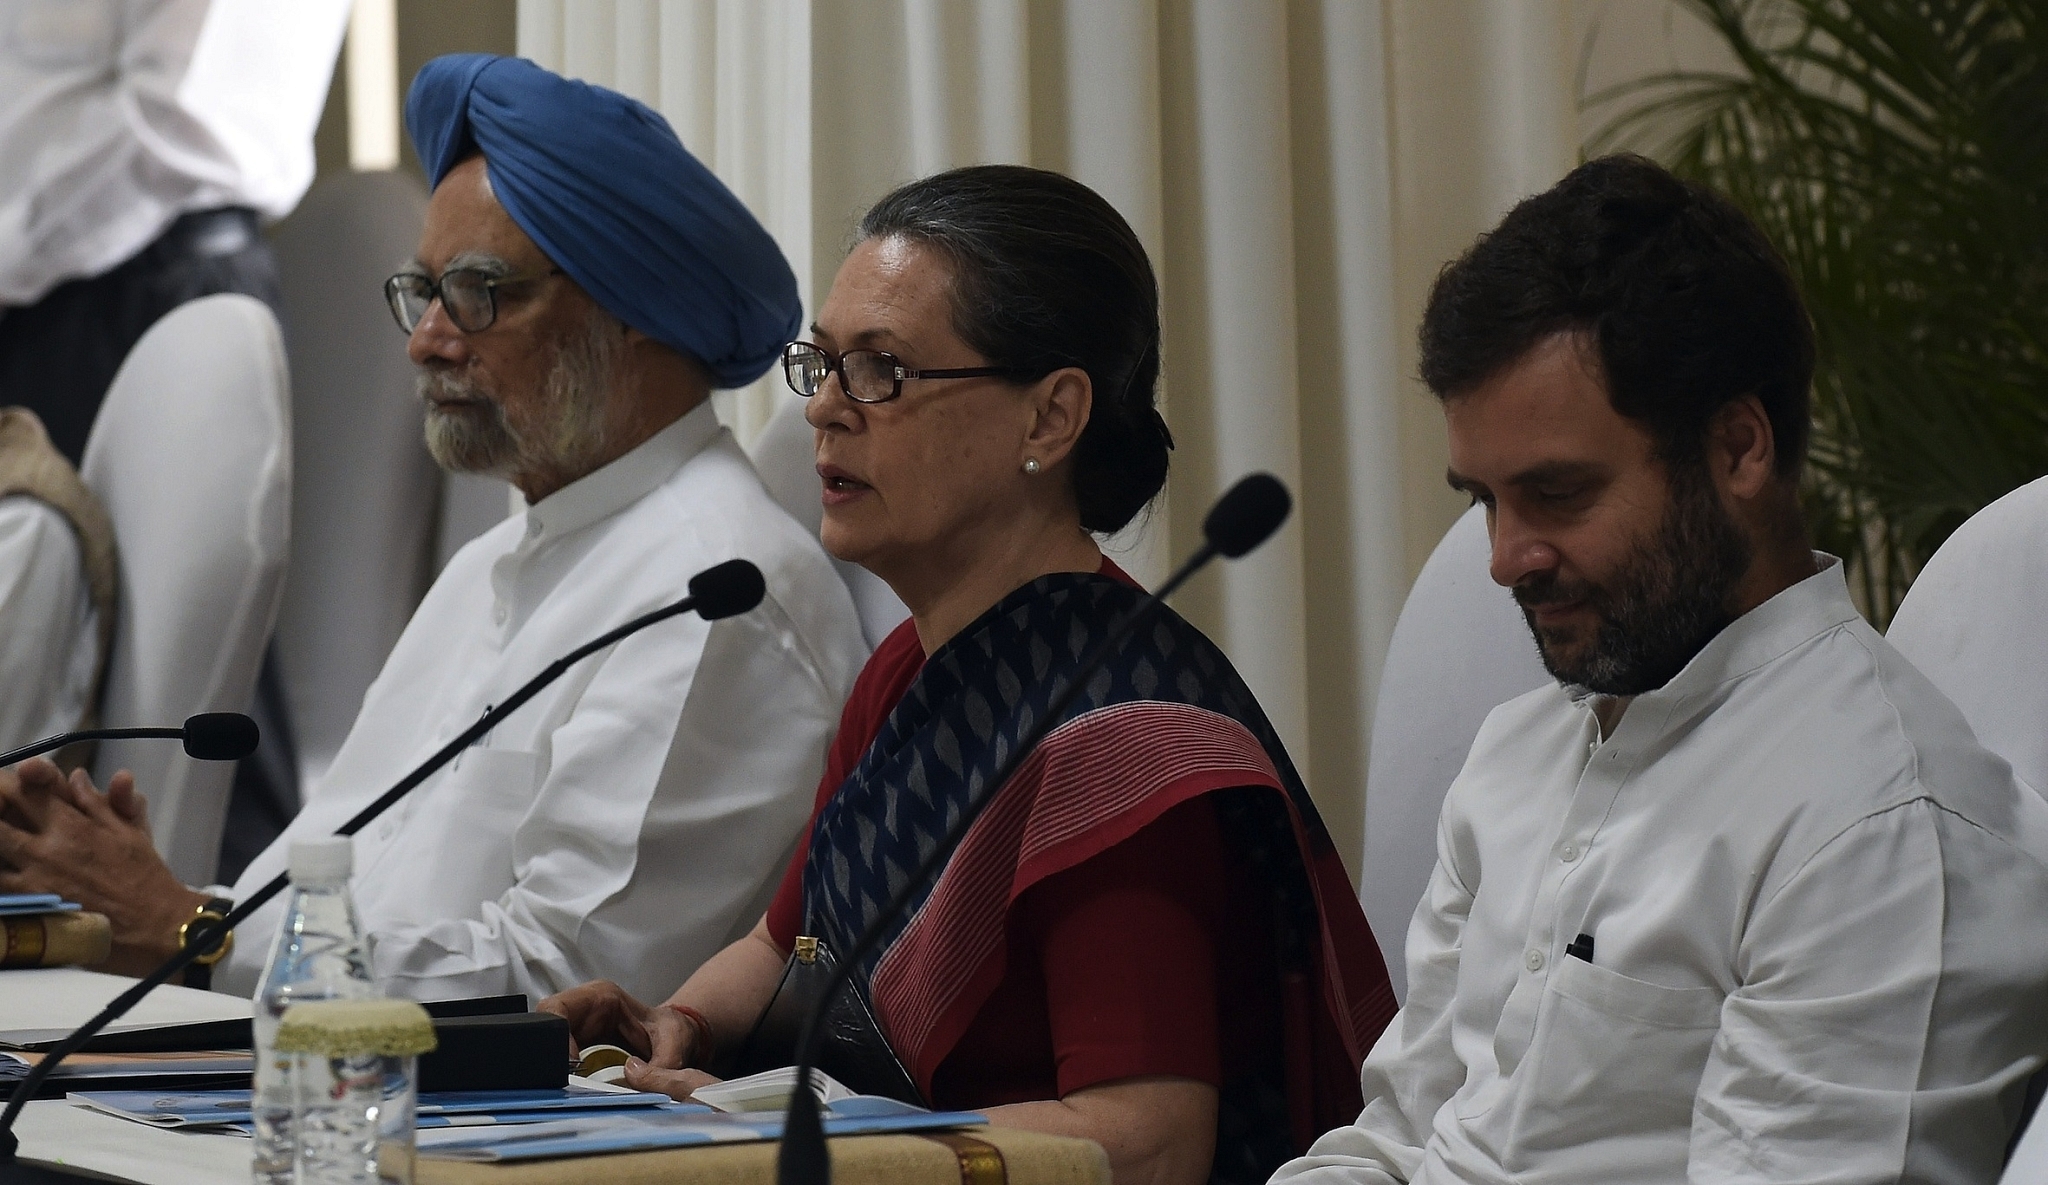 Former Prime Minister Manmohan Singh, UPA Chairperson Sonia Gandhi and Congress Vice-President Rahul Gandhi during a meeting (Getty Images)